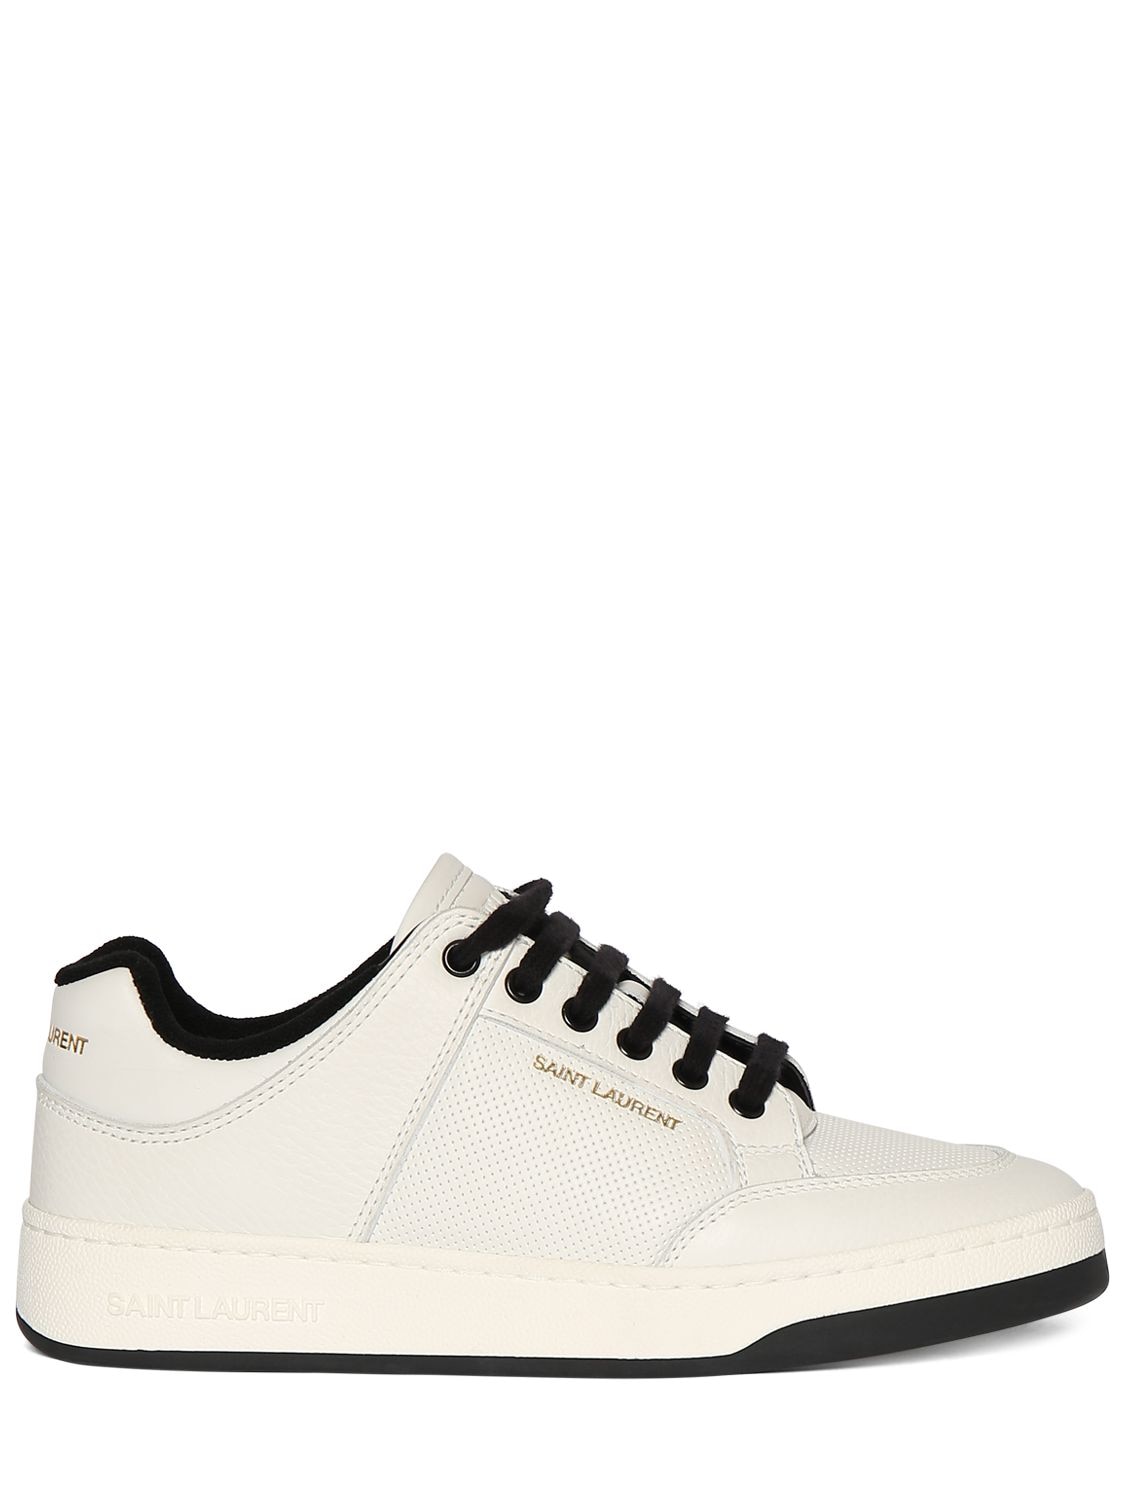 Saint Laurent 20mm Sl61 Low Top Leather Sneakers In White,black